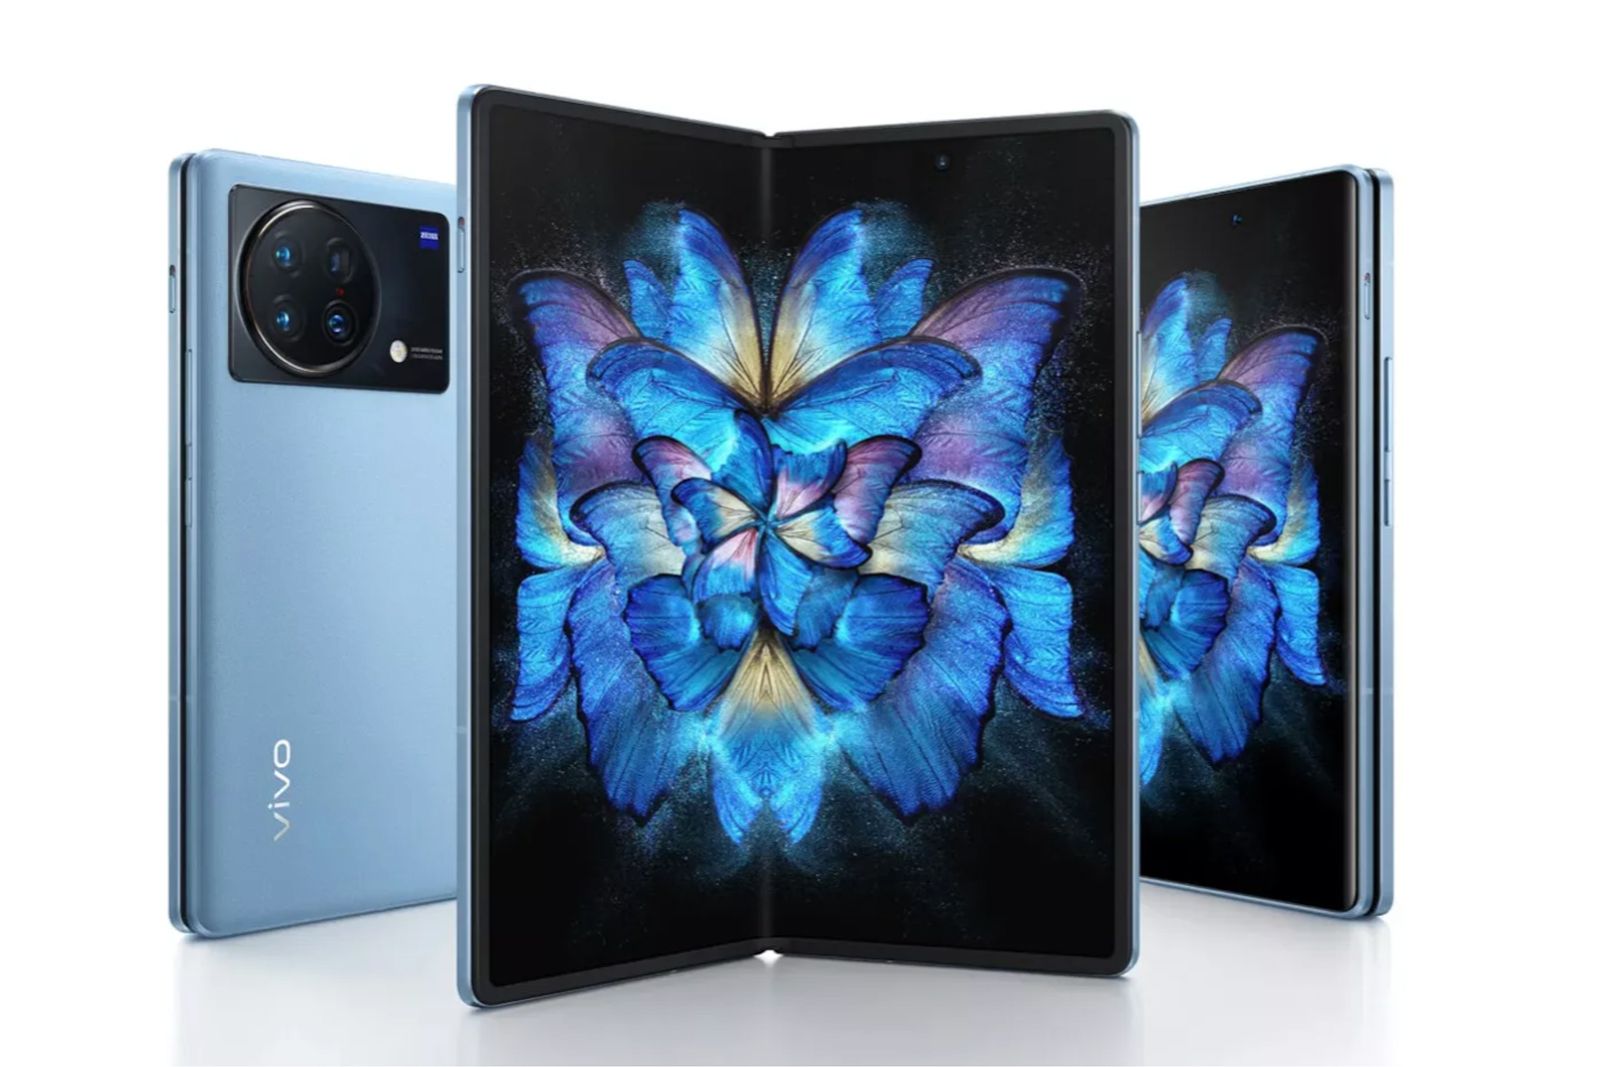 The impressive-sounding Vivo X Fold 2 launch could be just weeks away